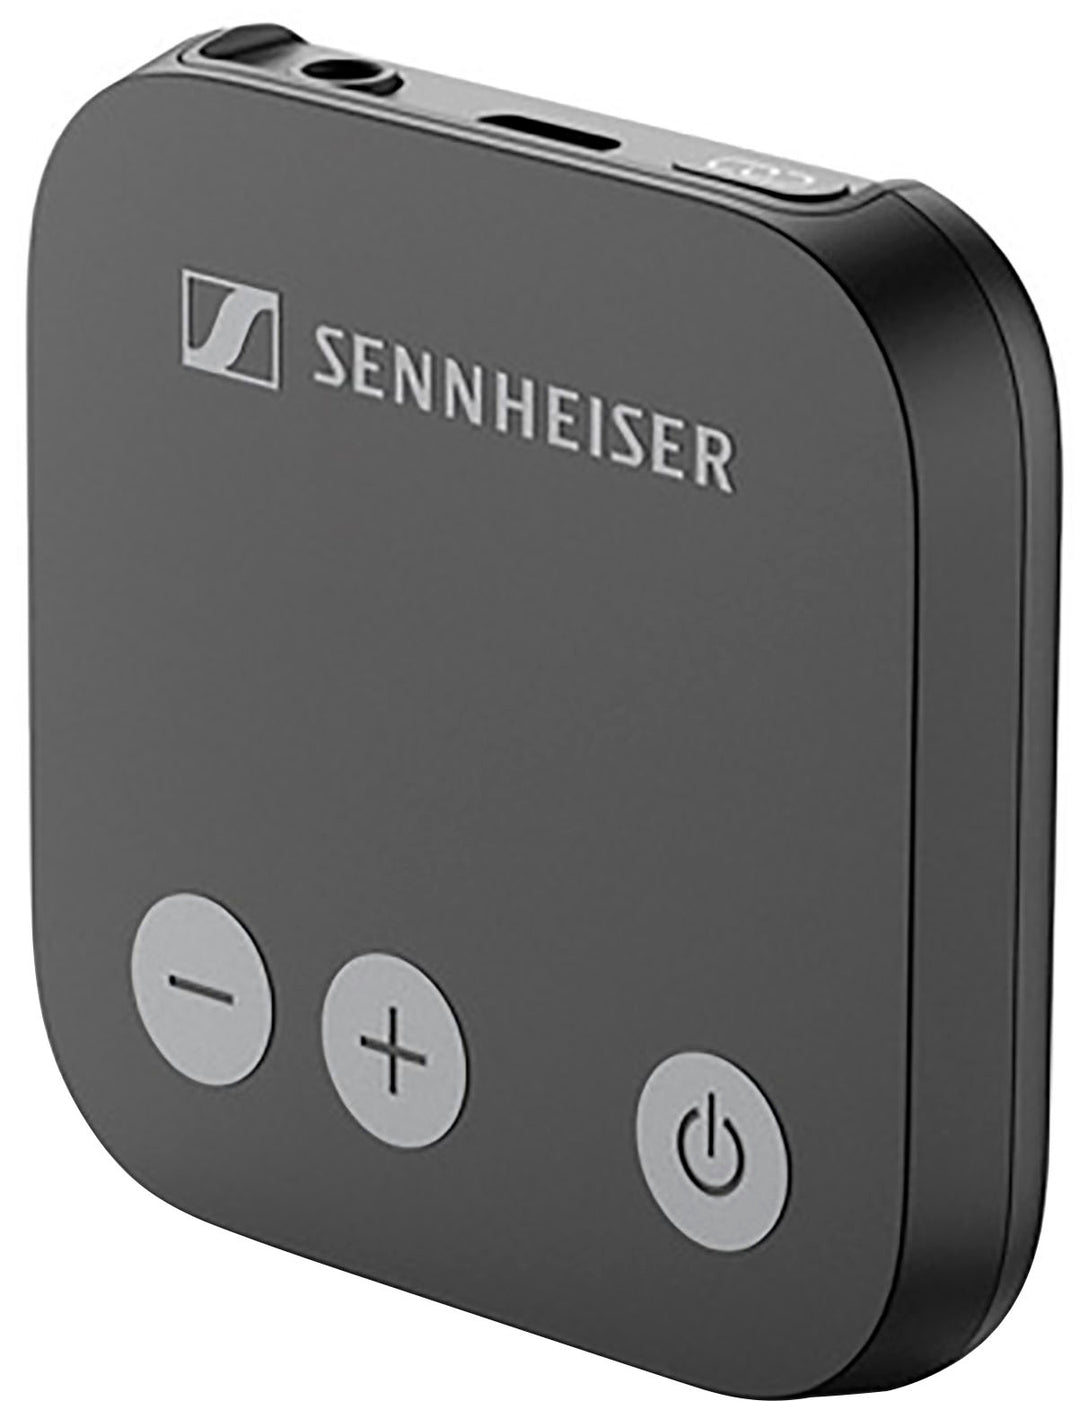 Sennheiser - TV Clear Set 2 - True Wireless In-Ear Advanced TV listening With 5 Speech Clarity Levels And TV Connector - Black_9